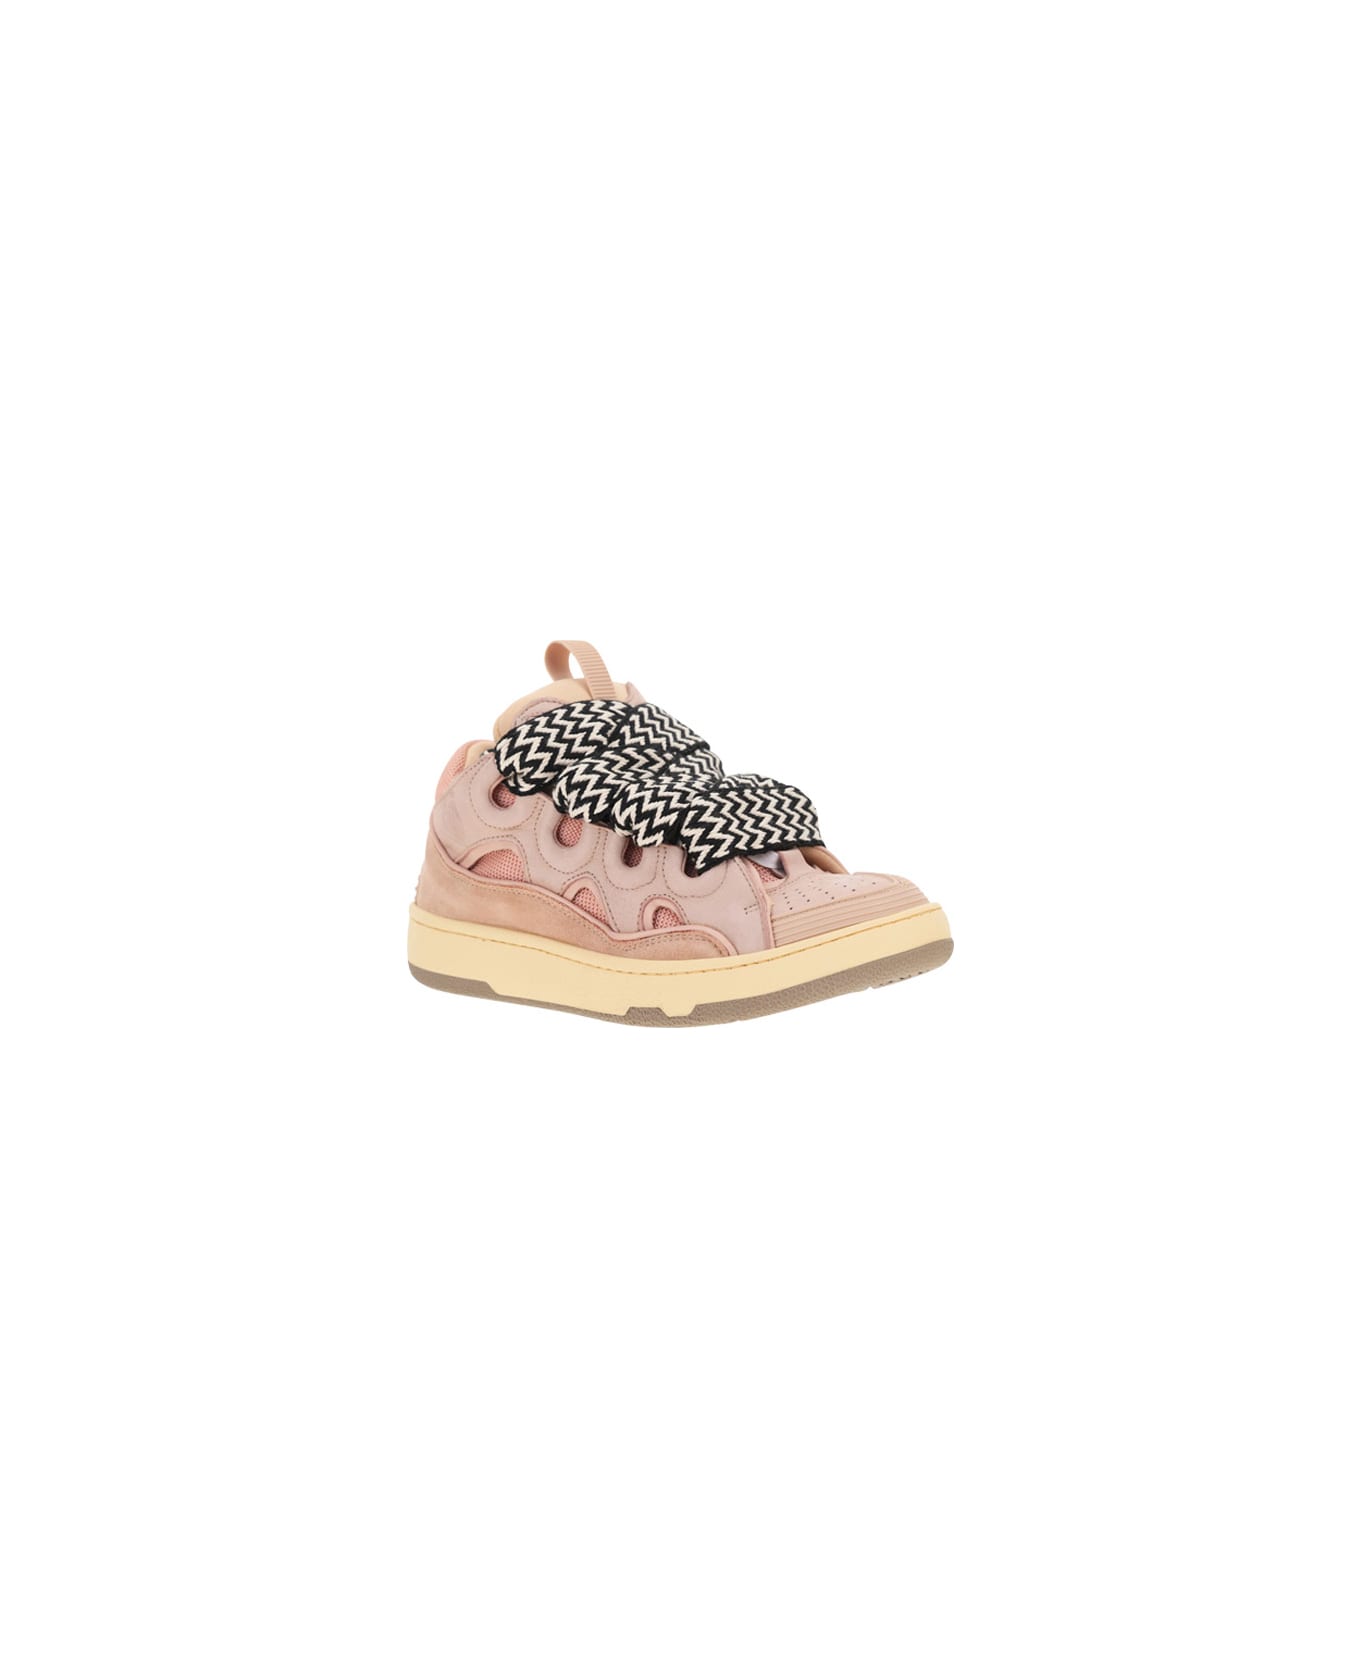 Lanvin Curb Sneakers - Pale Pink